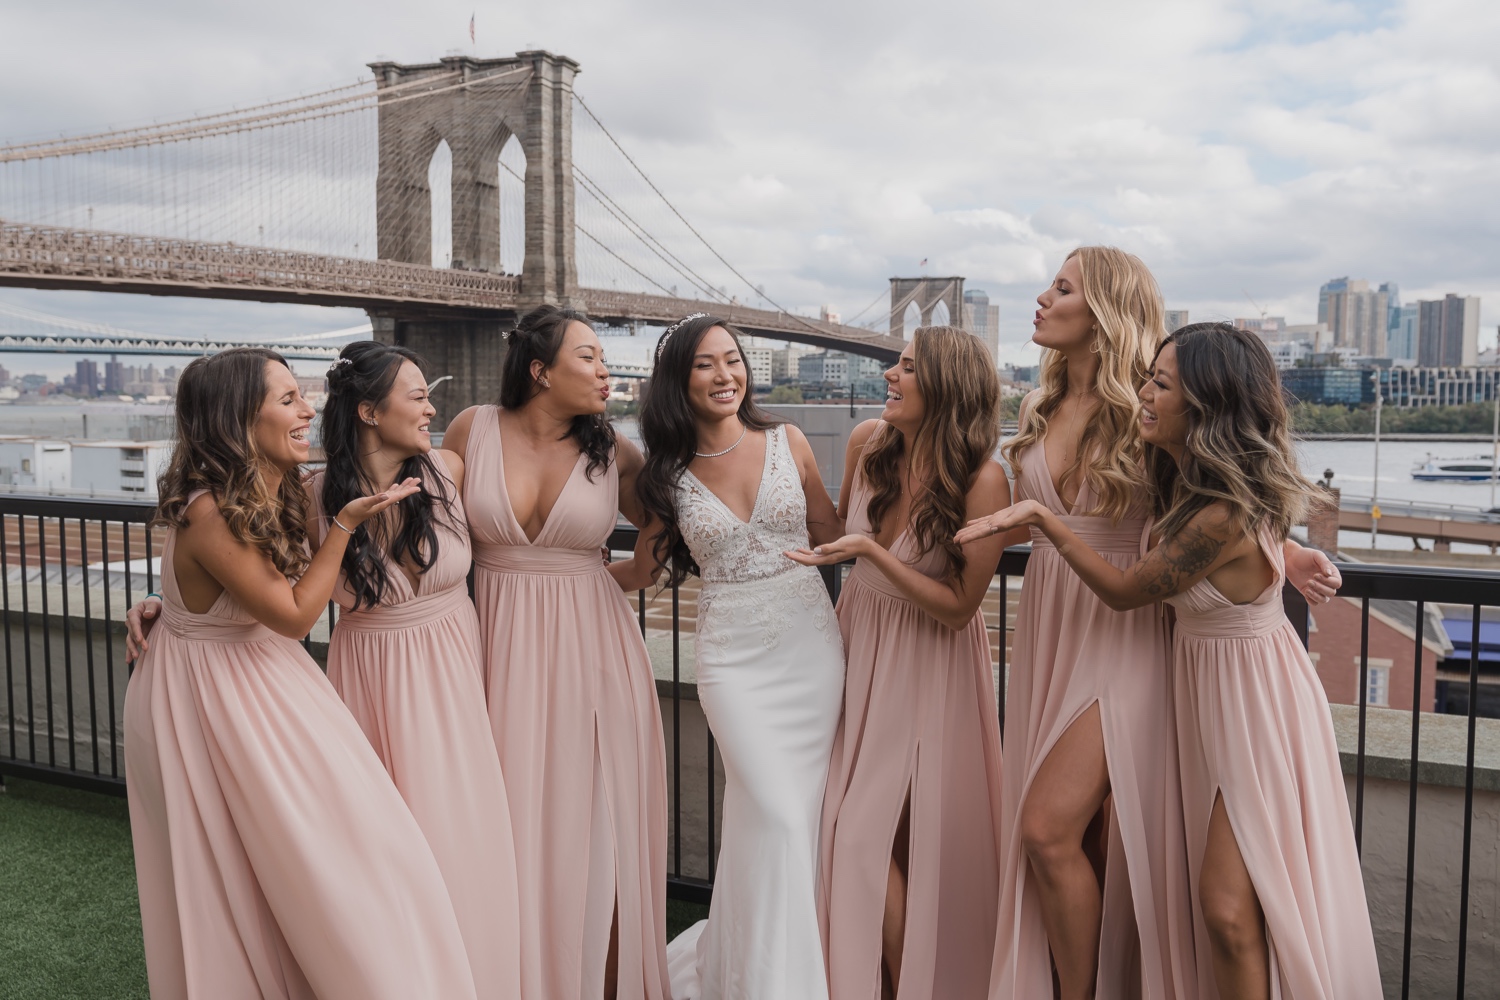 A portrait session of a bride with her wedding dress and her bridesmaids in Mr. C Seaport Hotel on a wedding day at Cipriani Wall Street in New York City. Wedding Dress by Pronovias